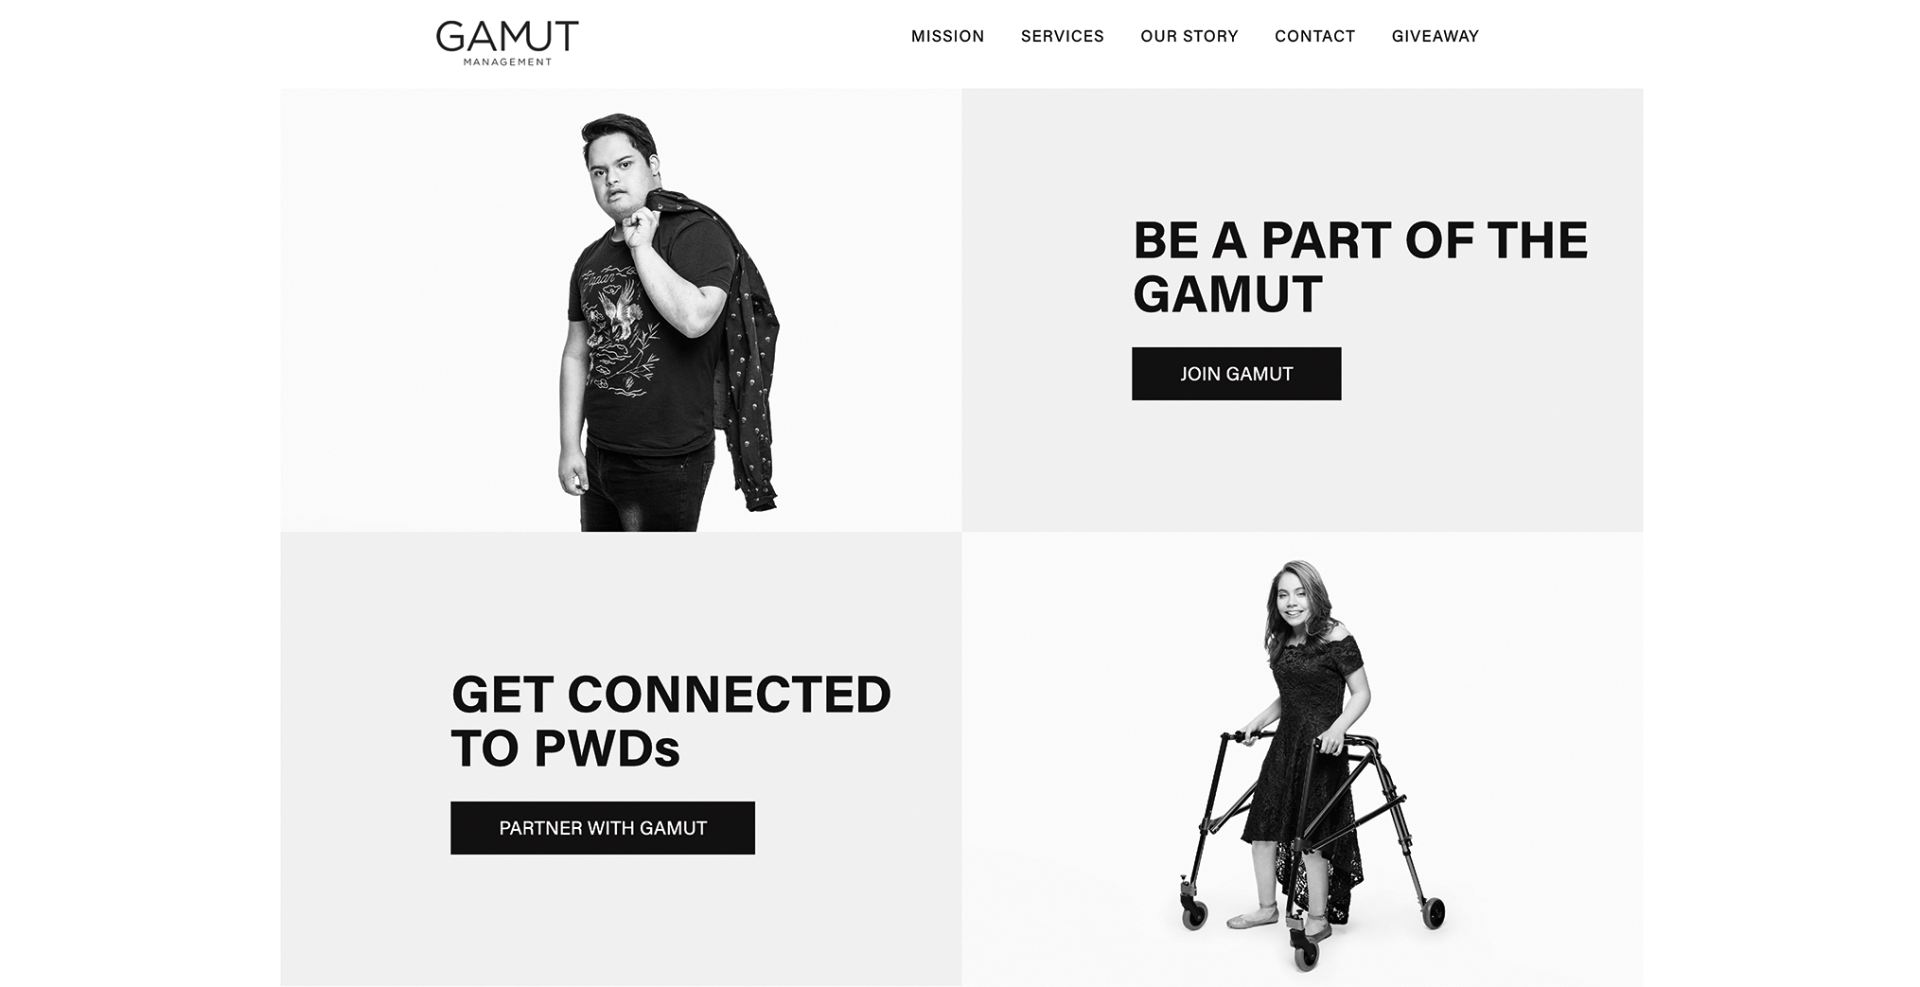 Images of Gamut Management with the label Get Connected to PWDs (Partner with Gaumut) and Be a part of the Gamut (Join Gamut)